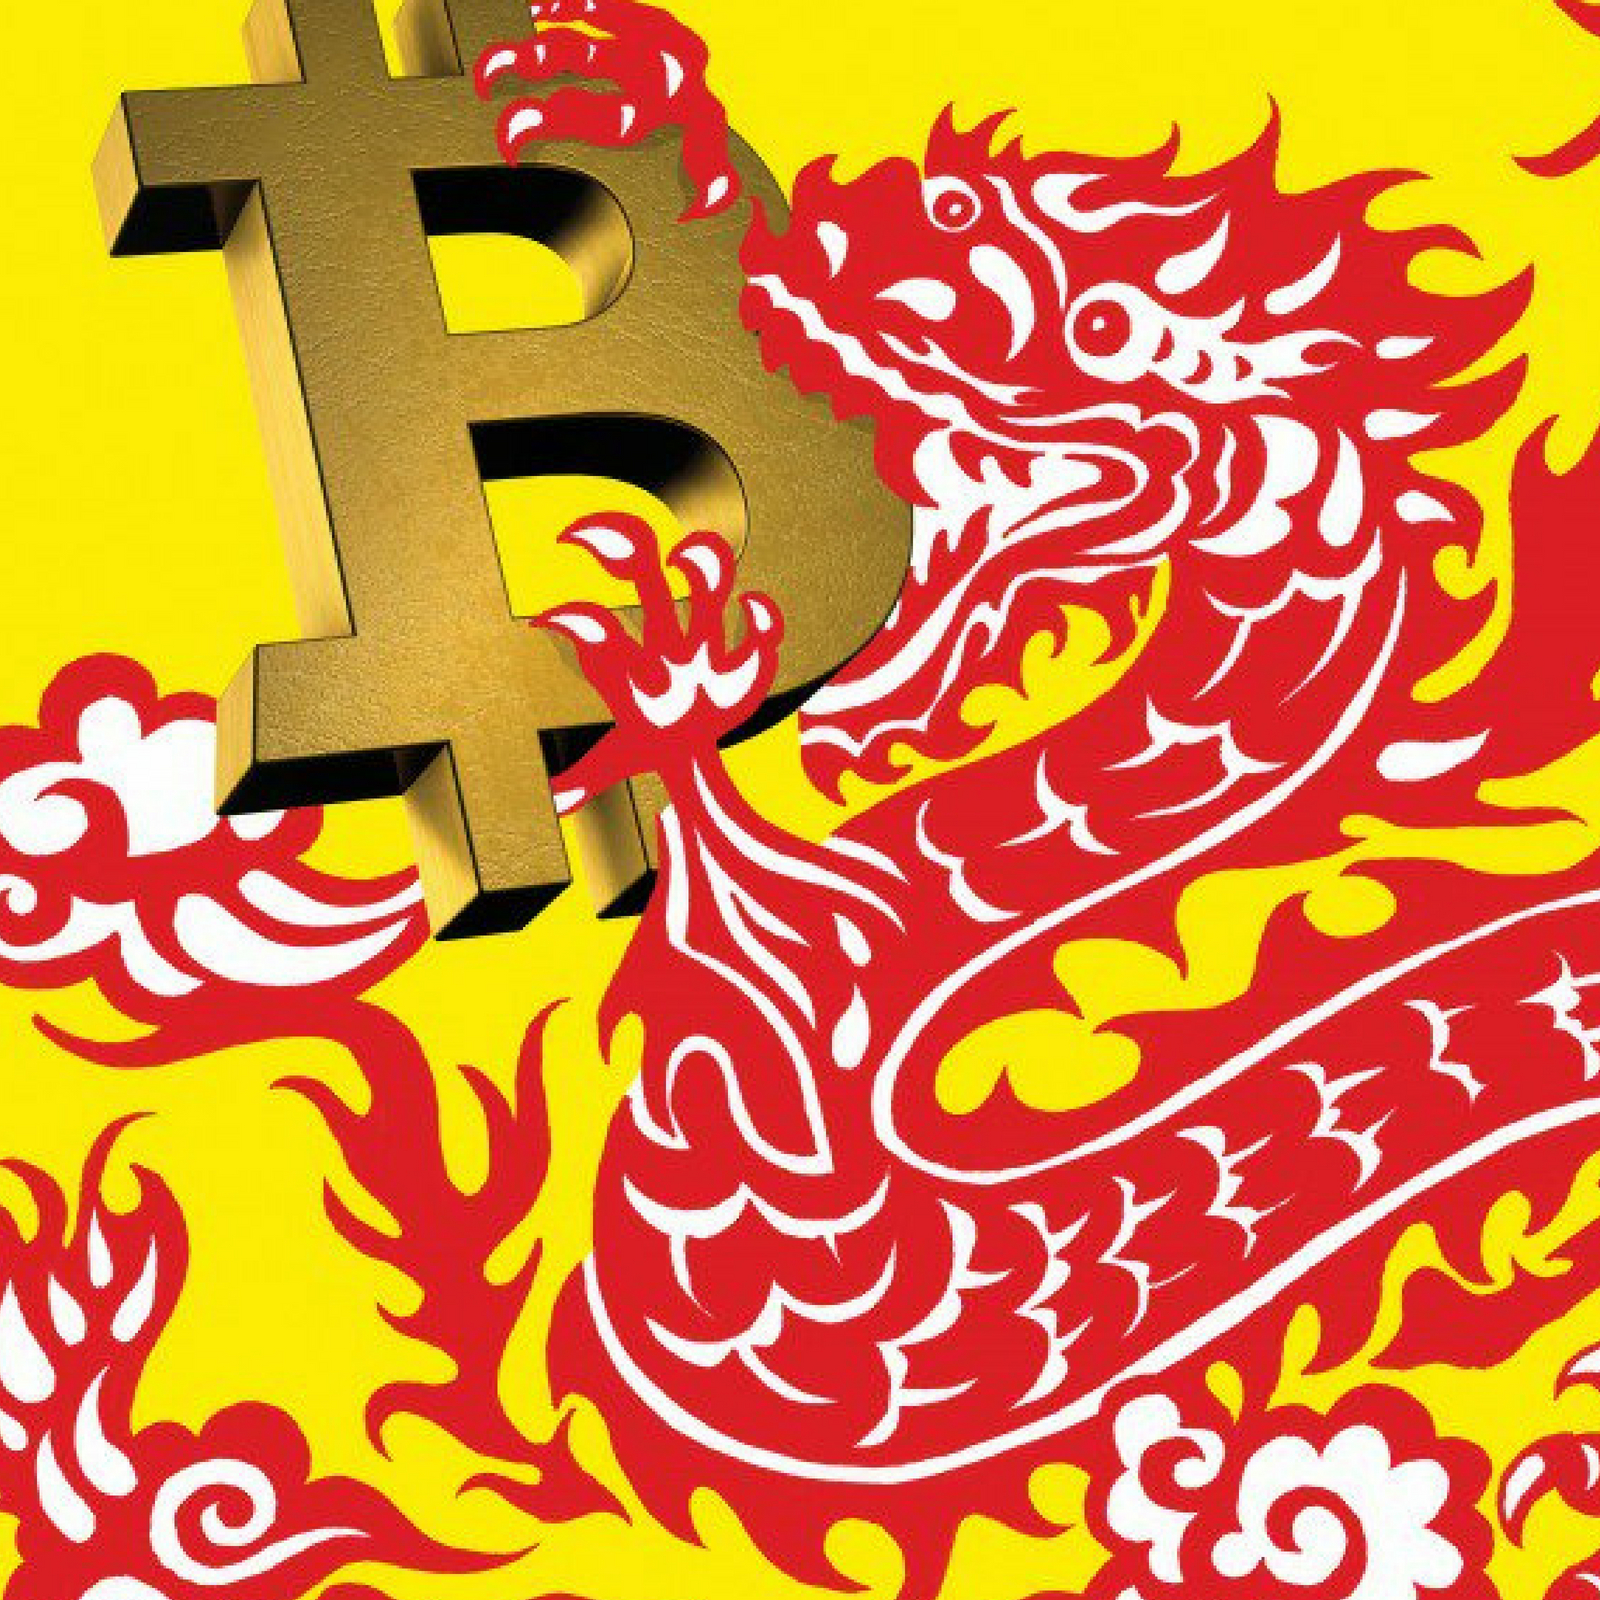 Analysts: China’s Cryptocurrency Could Be Bigger Than Bitcoin